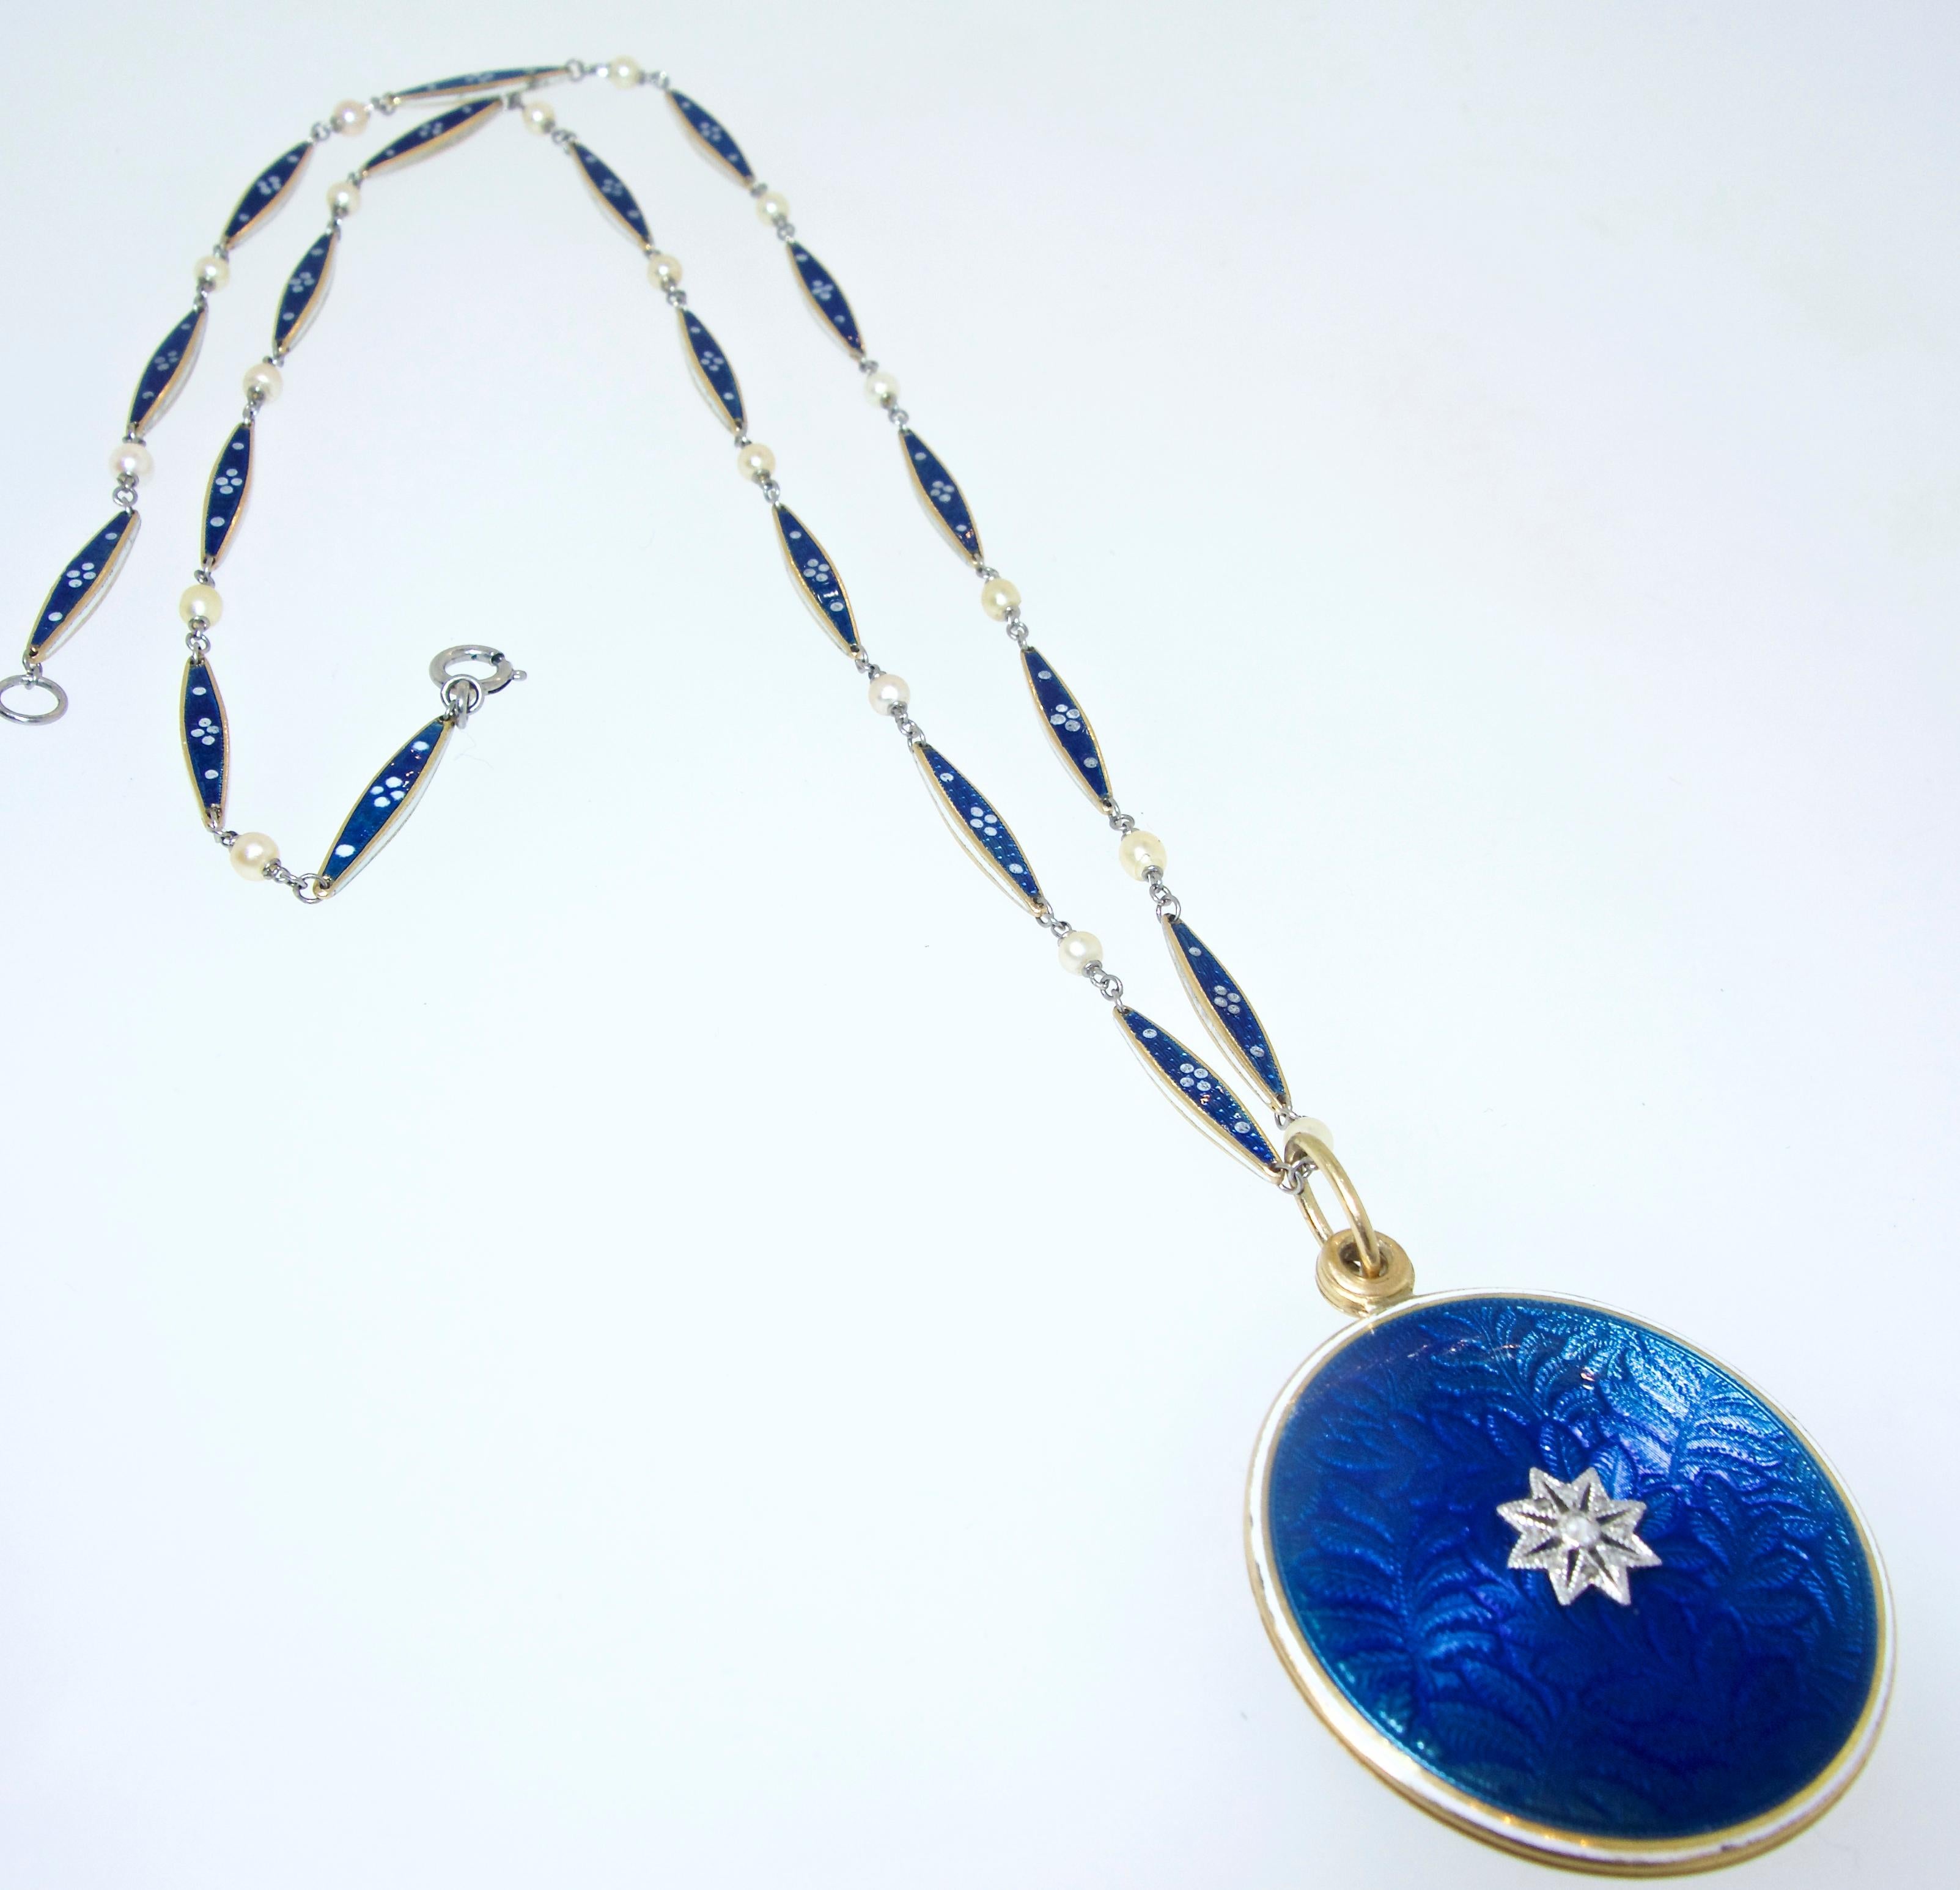 Antique locket both sides of which has guilloche blue enamel, white opaque enamel, natural pearls, and on the front a rose cut diamond floret in platinum The locket slides to the side when one wants to see the enclosed photos, then remains shut as a